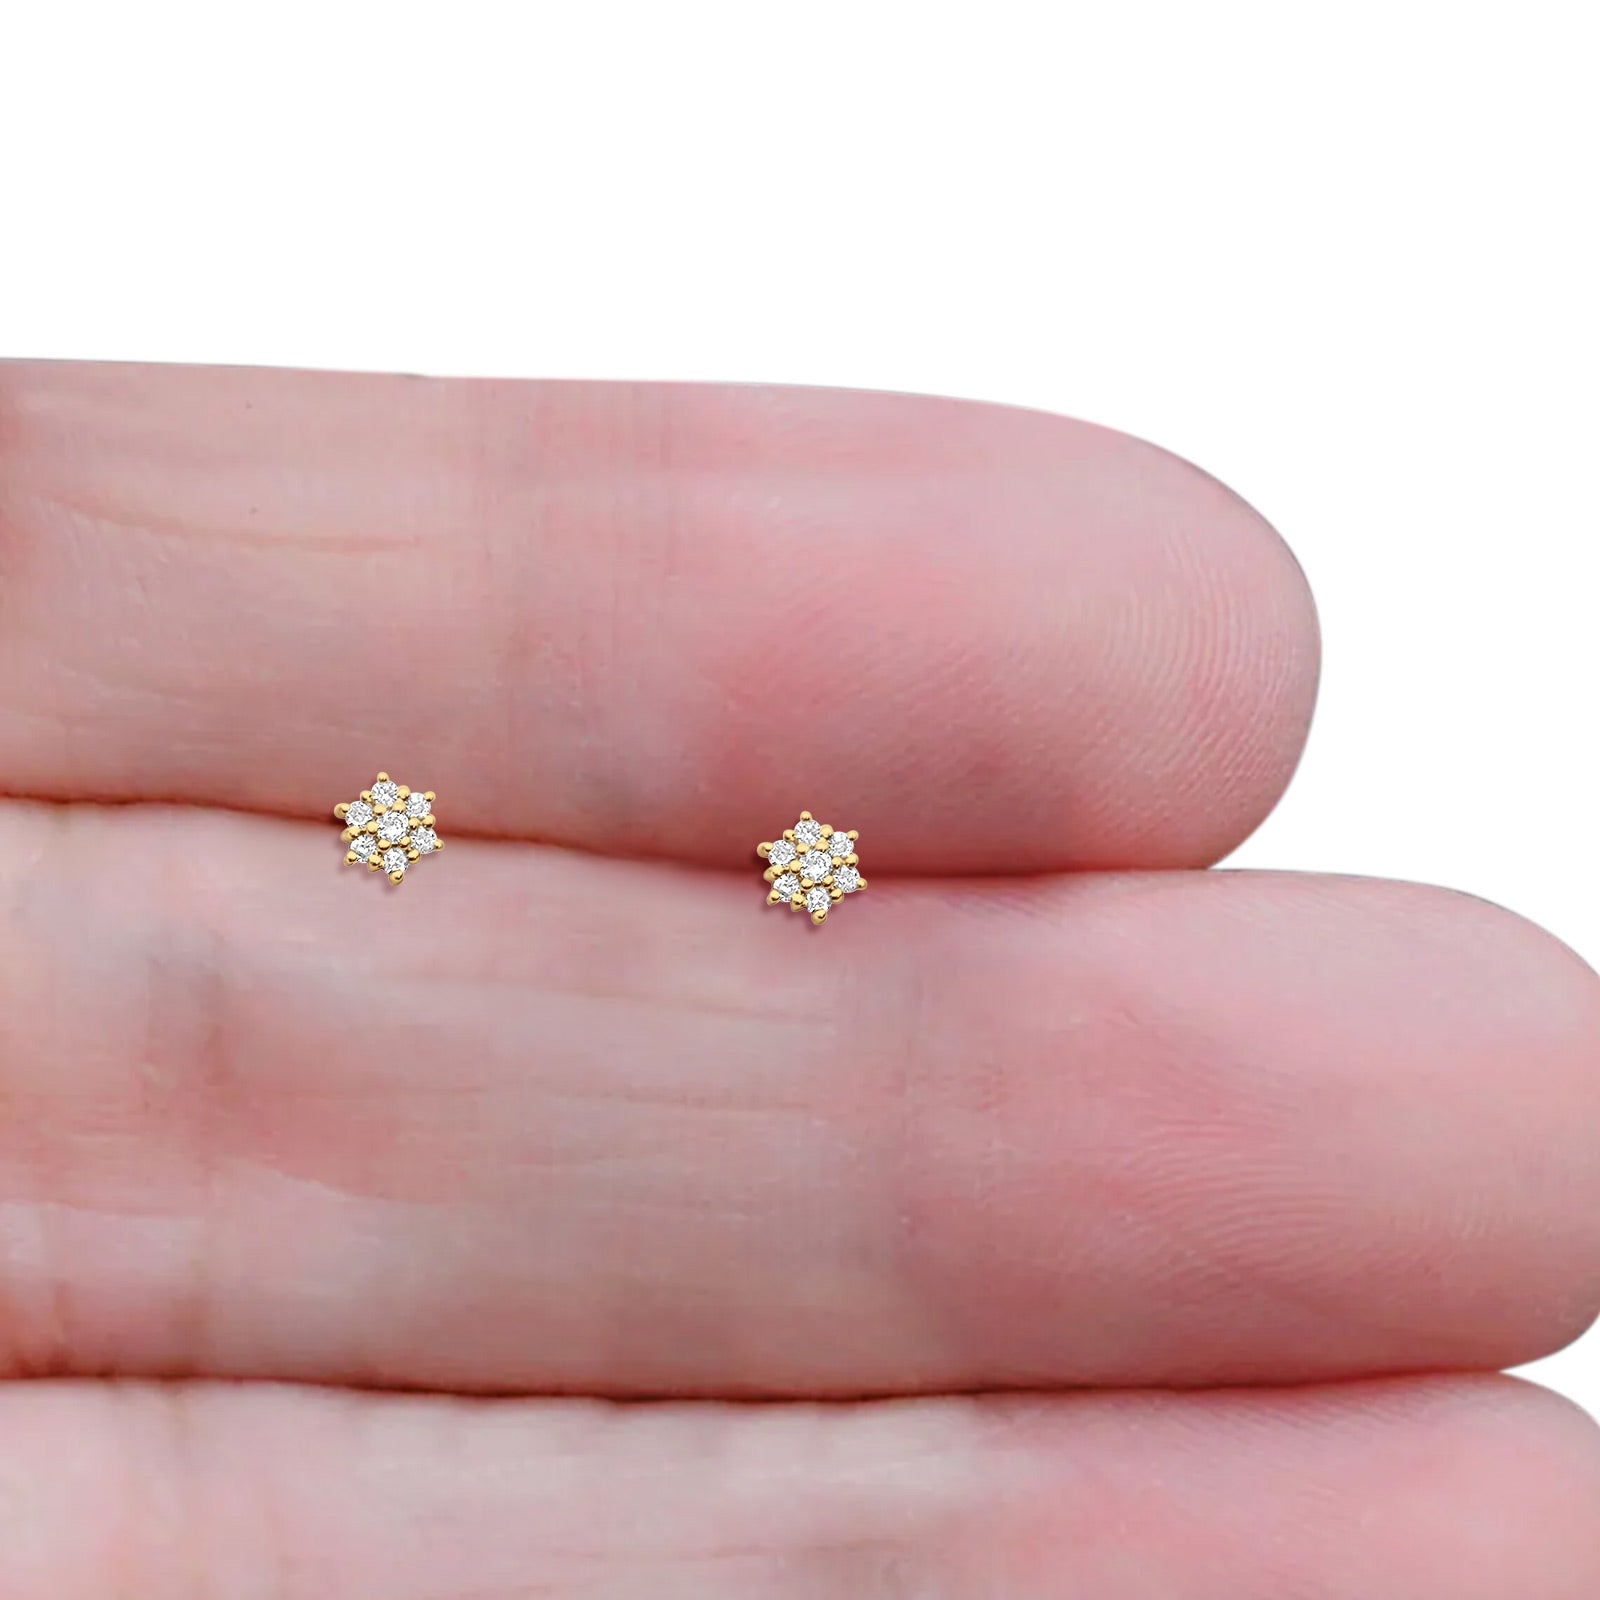 Solid 10K Gold 3mm Flower Shaped Round Diamond Stud Earring